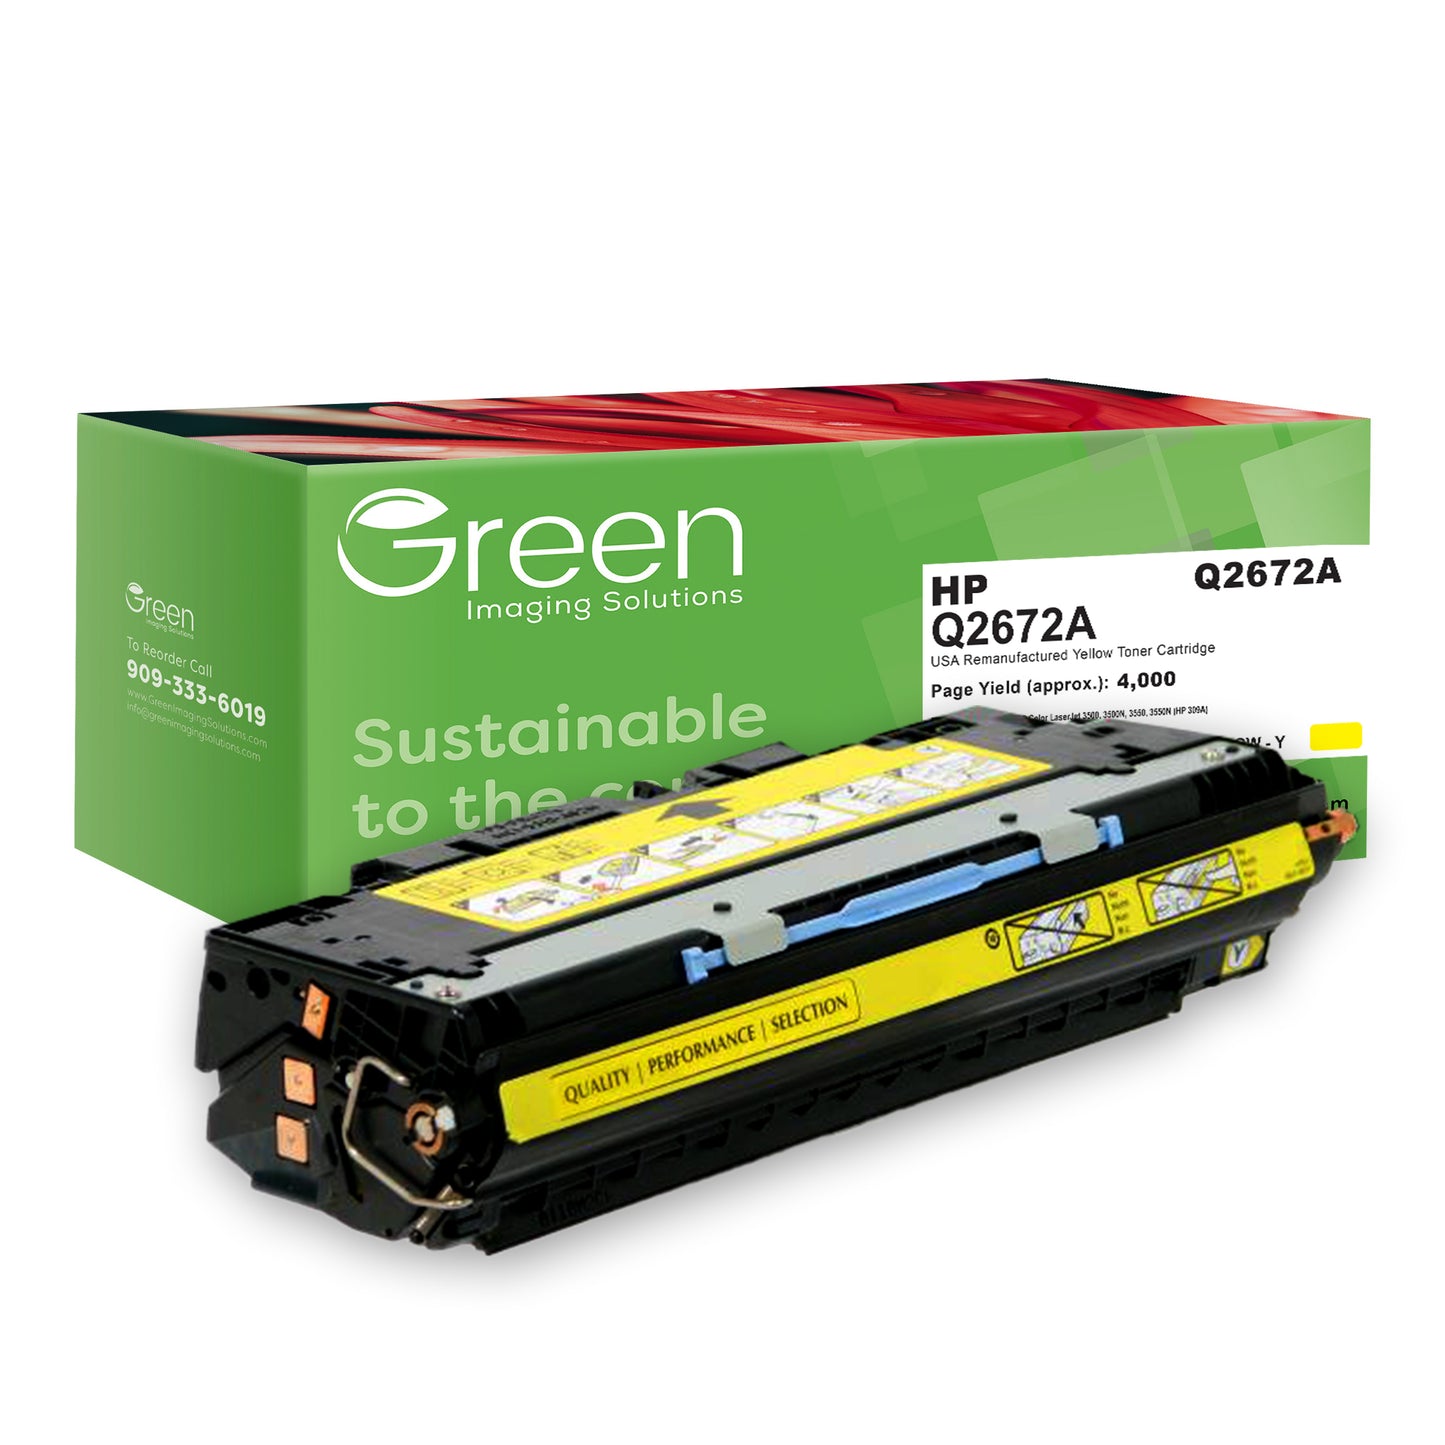 GIS USA Remanufactured Yellow Toner Cartridge for HP Q2672A (HP 309A)